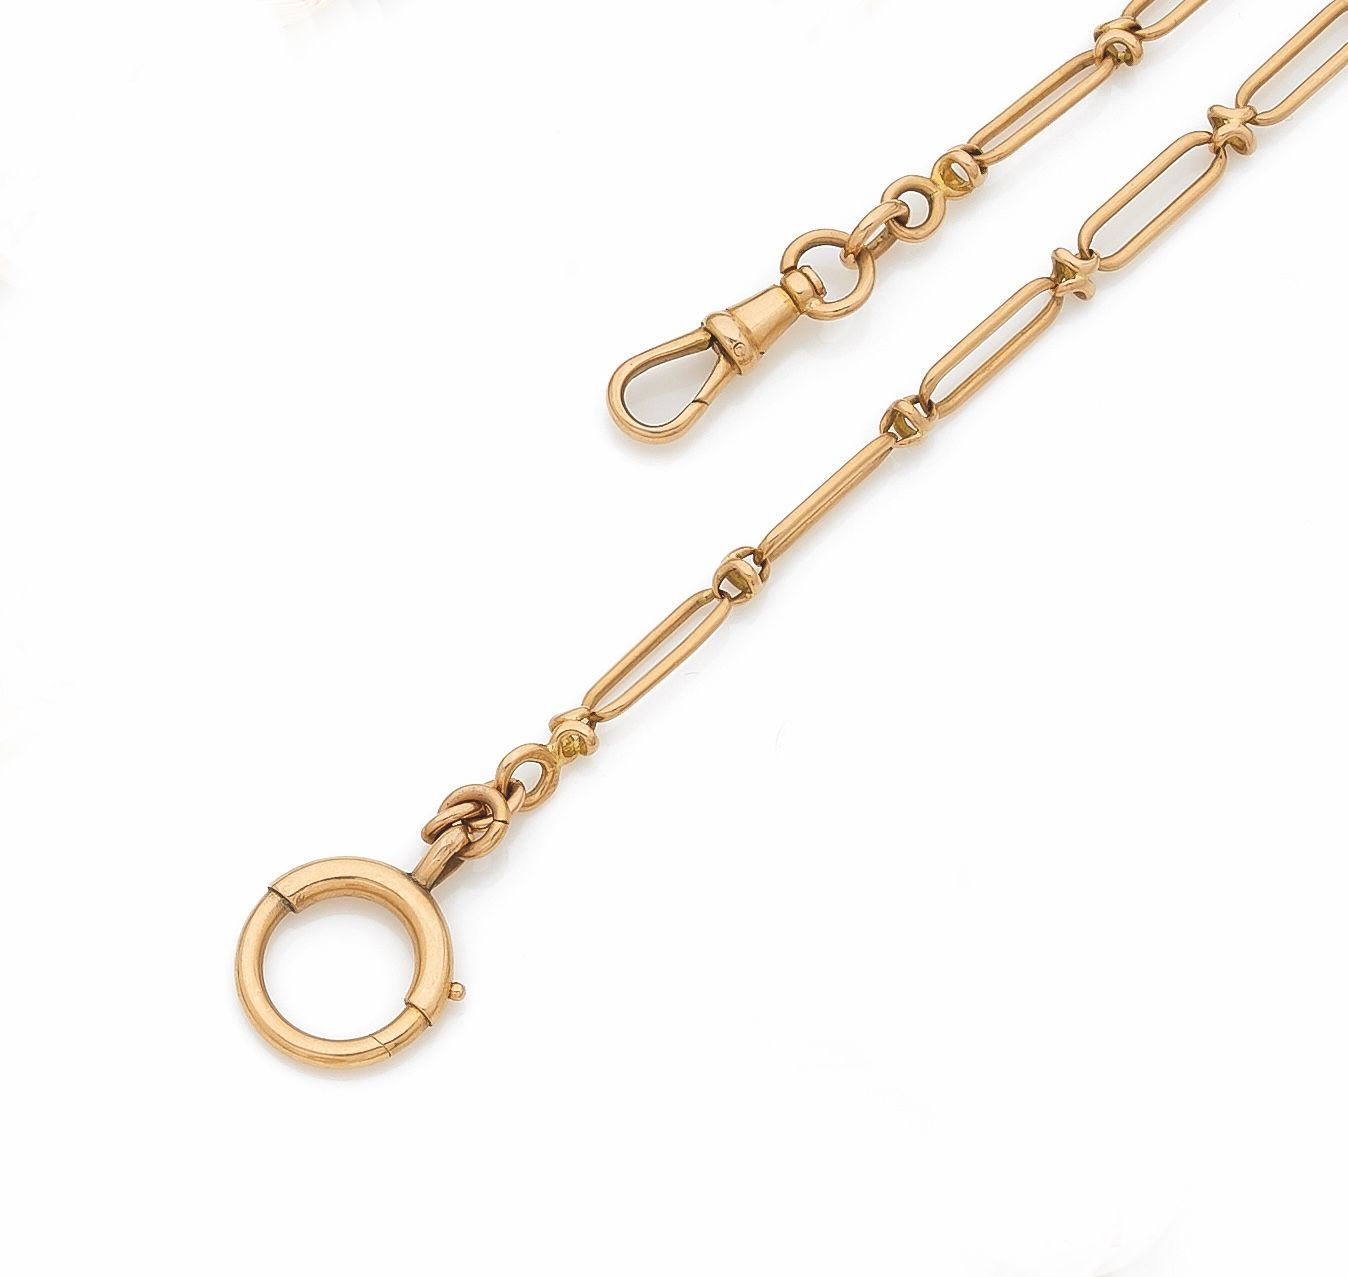 Null Fancy horse chain in yellow gold 750 mils. Weight 16,58 g. L 37 cm.